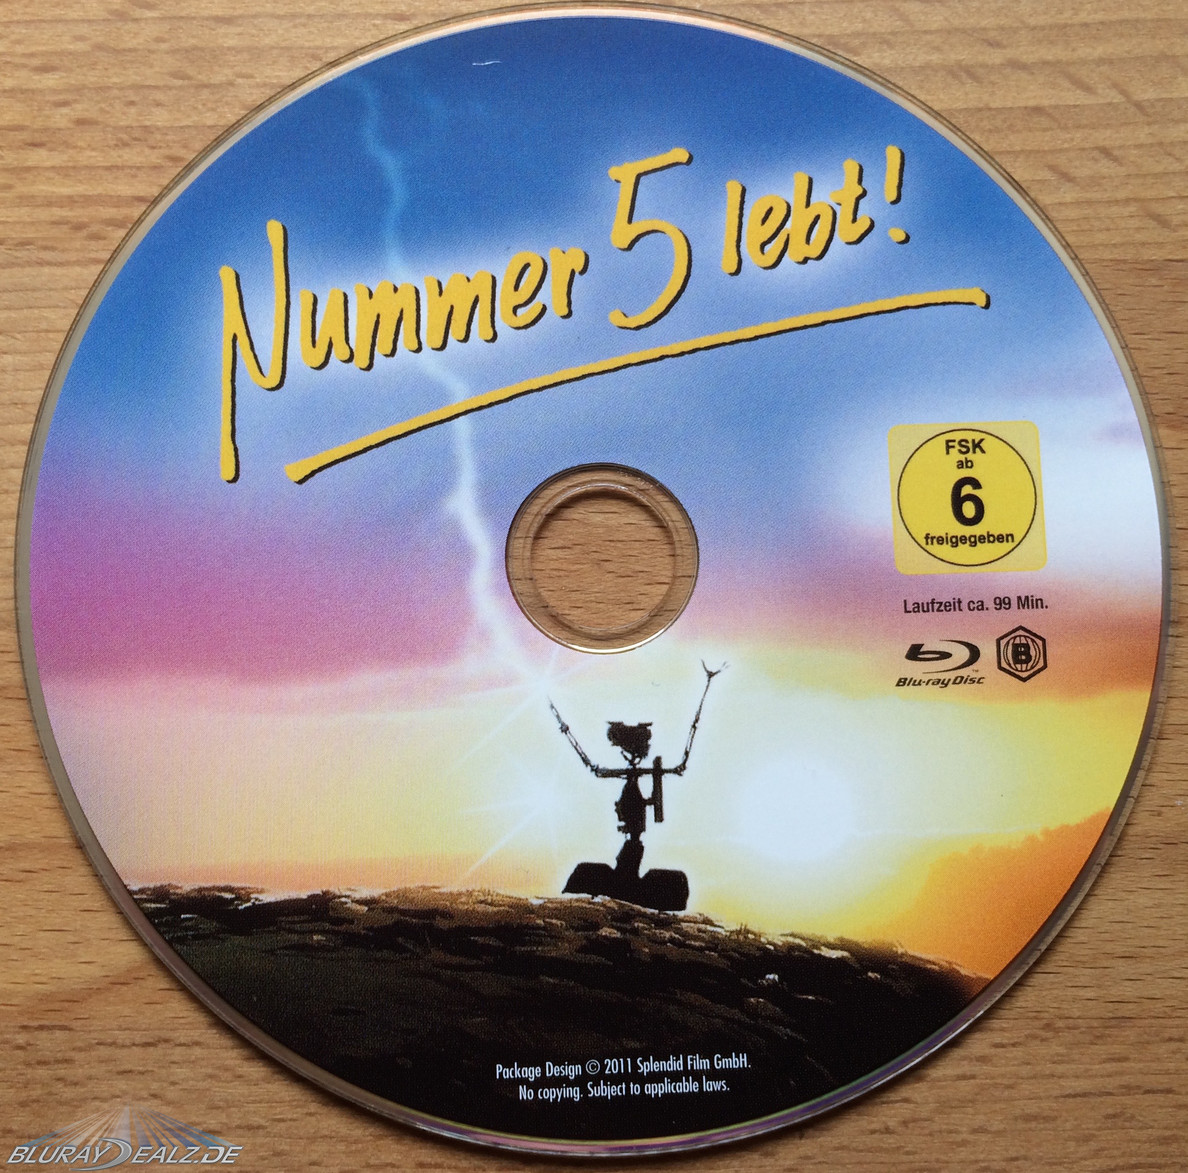 [Review] Nummer 5 lebt! 30th Anniversary – Limited Edition Steelbook